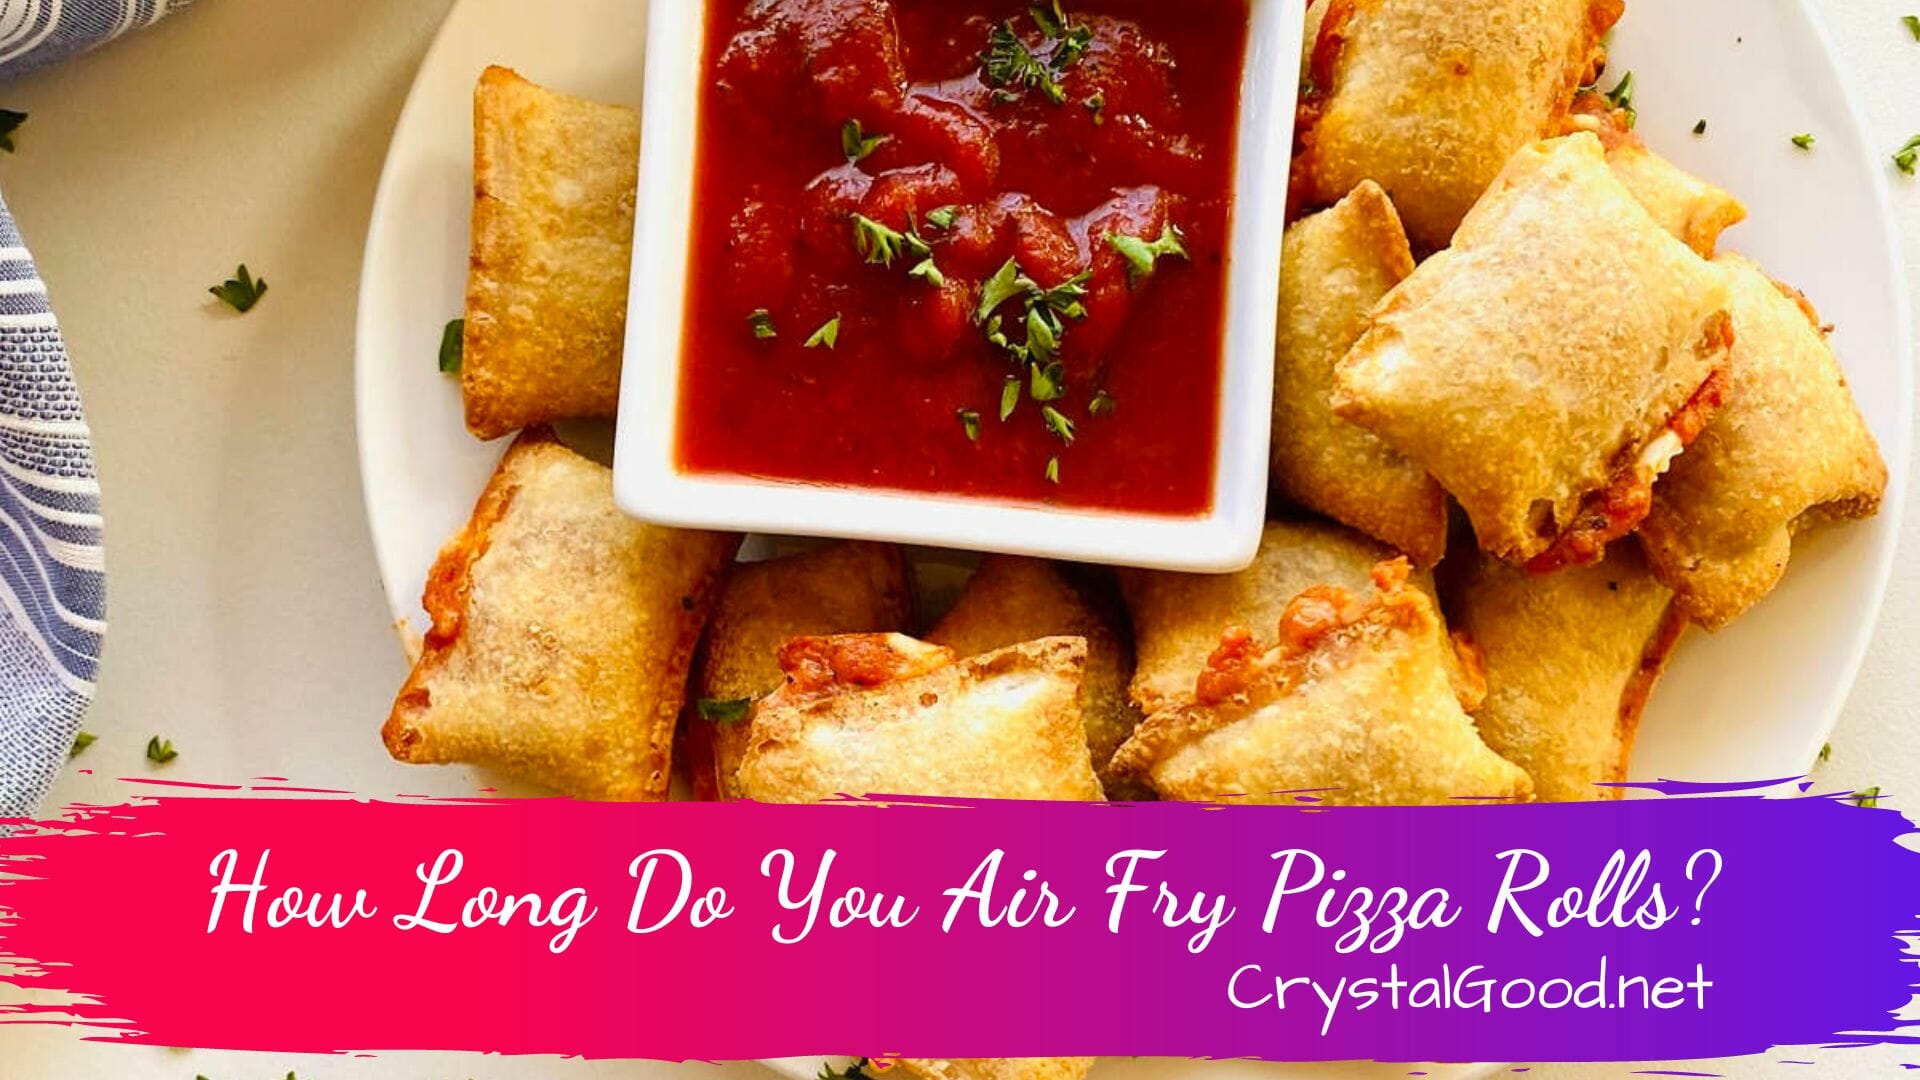 How Long Do You Air Fry Pizza Rolls? - Crystal Good